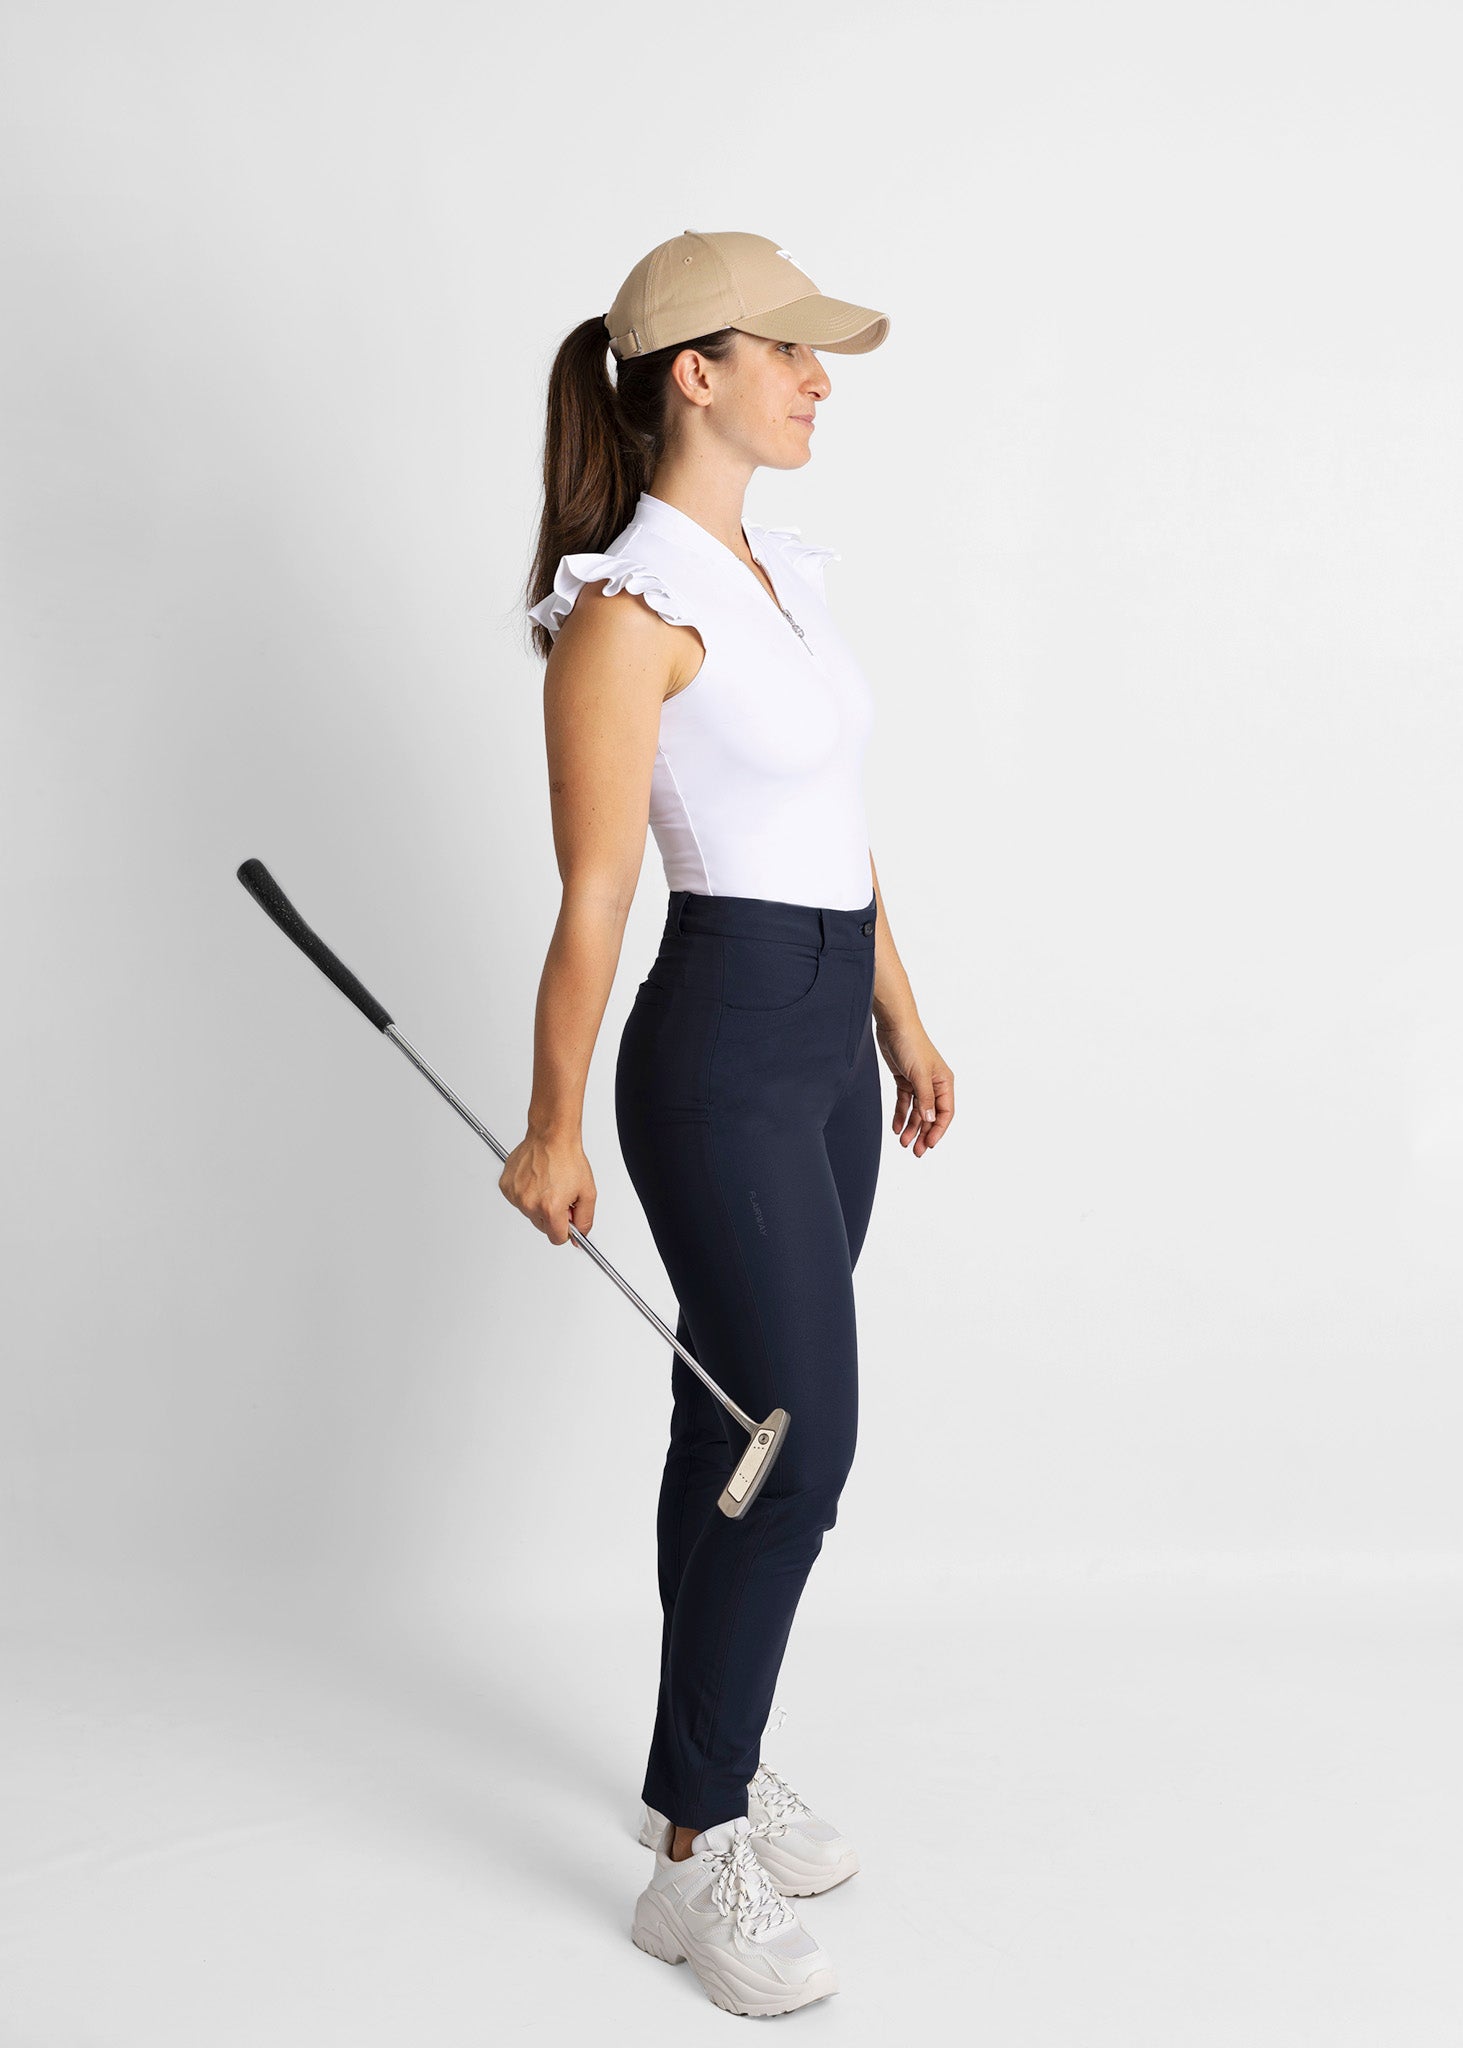 unisex organic cotton golf cap (beige) featured with high-waisted golf pants (navy) and sleeveless golf shirt with ruffle details (white)